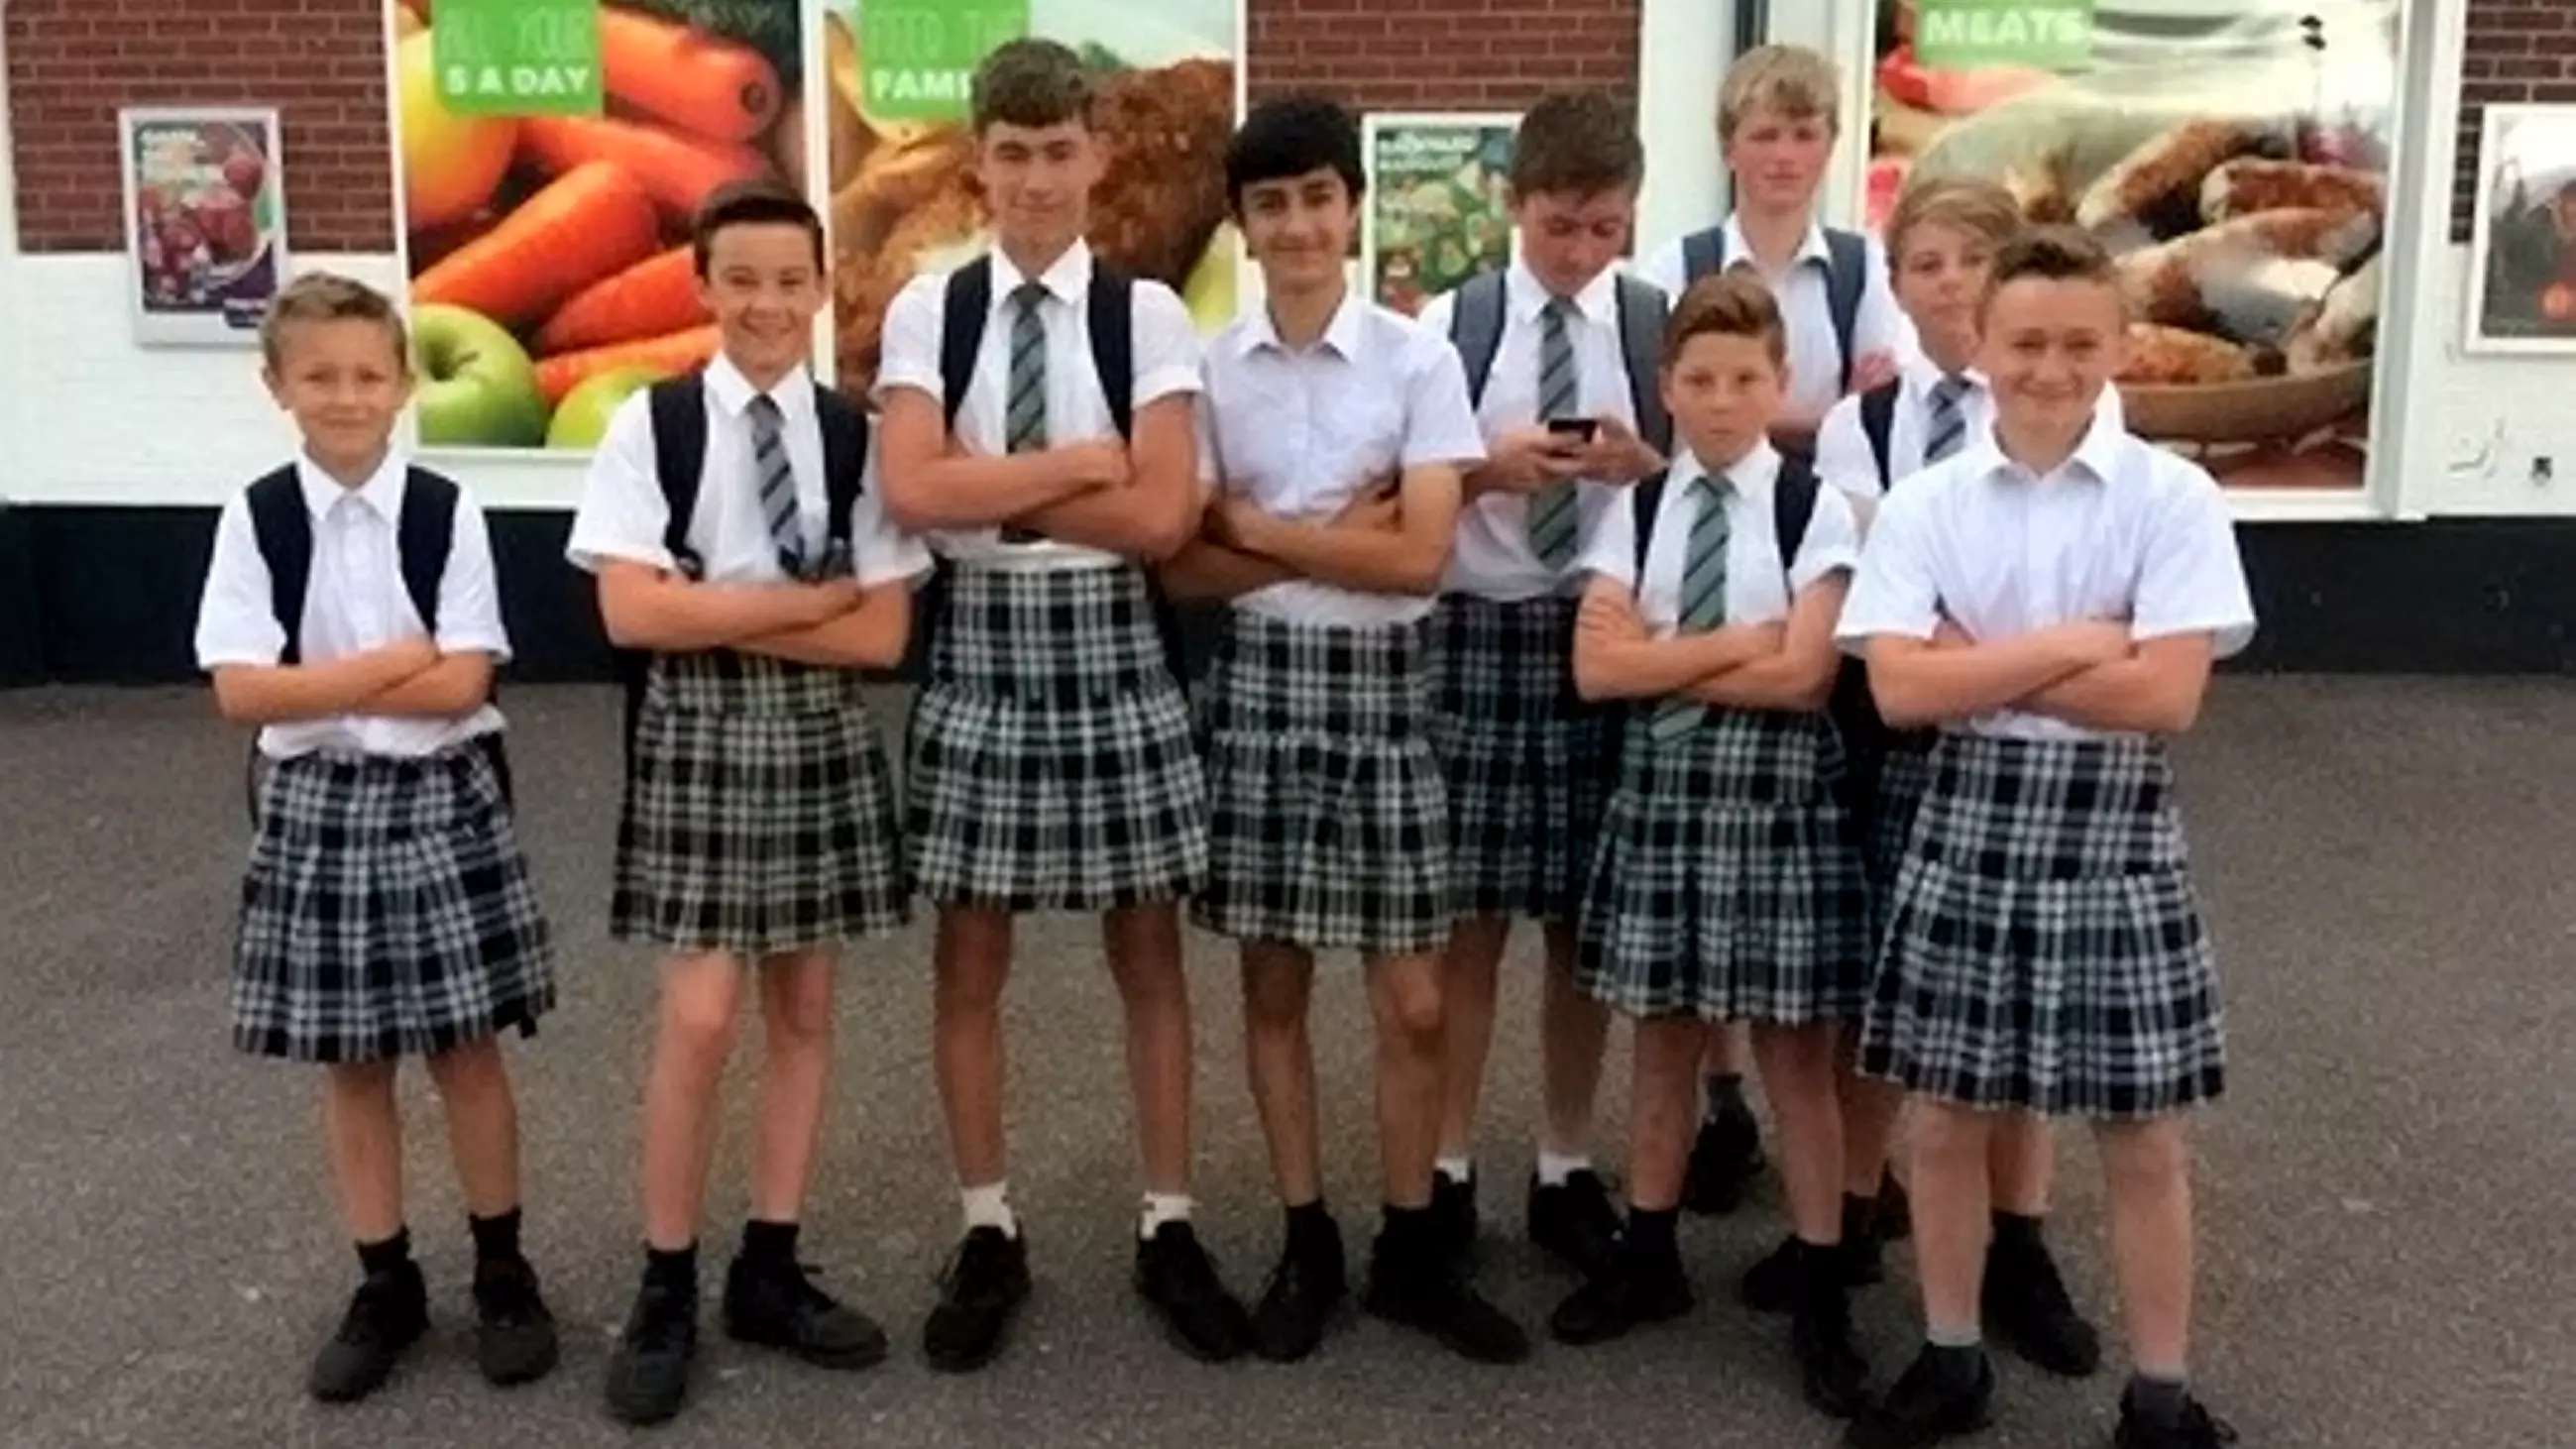 Young LADs Defy 'Shorts Ban' By Wearing Skirts To School